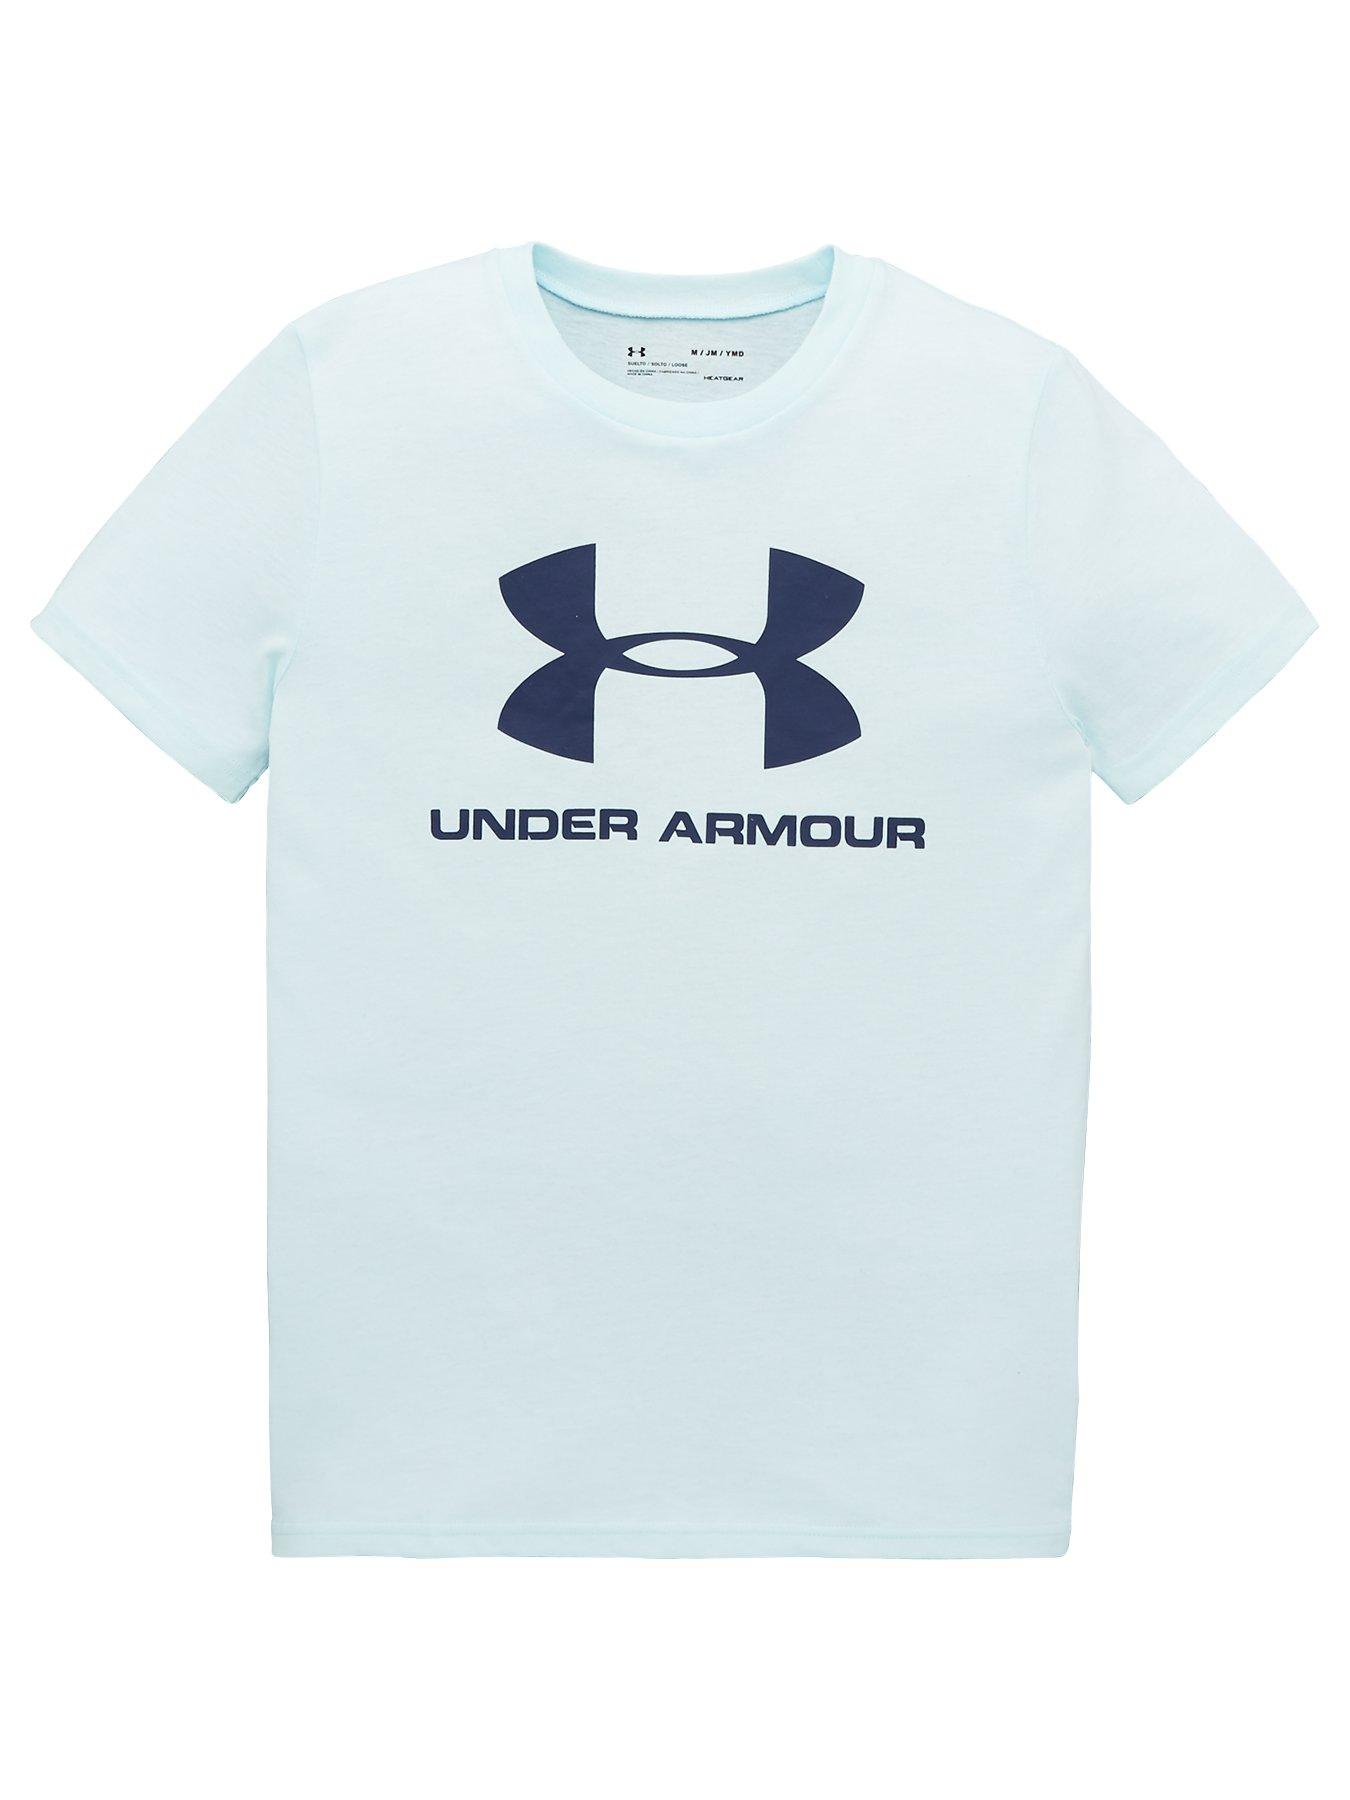 under armour holiday lights shirt